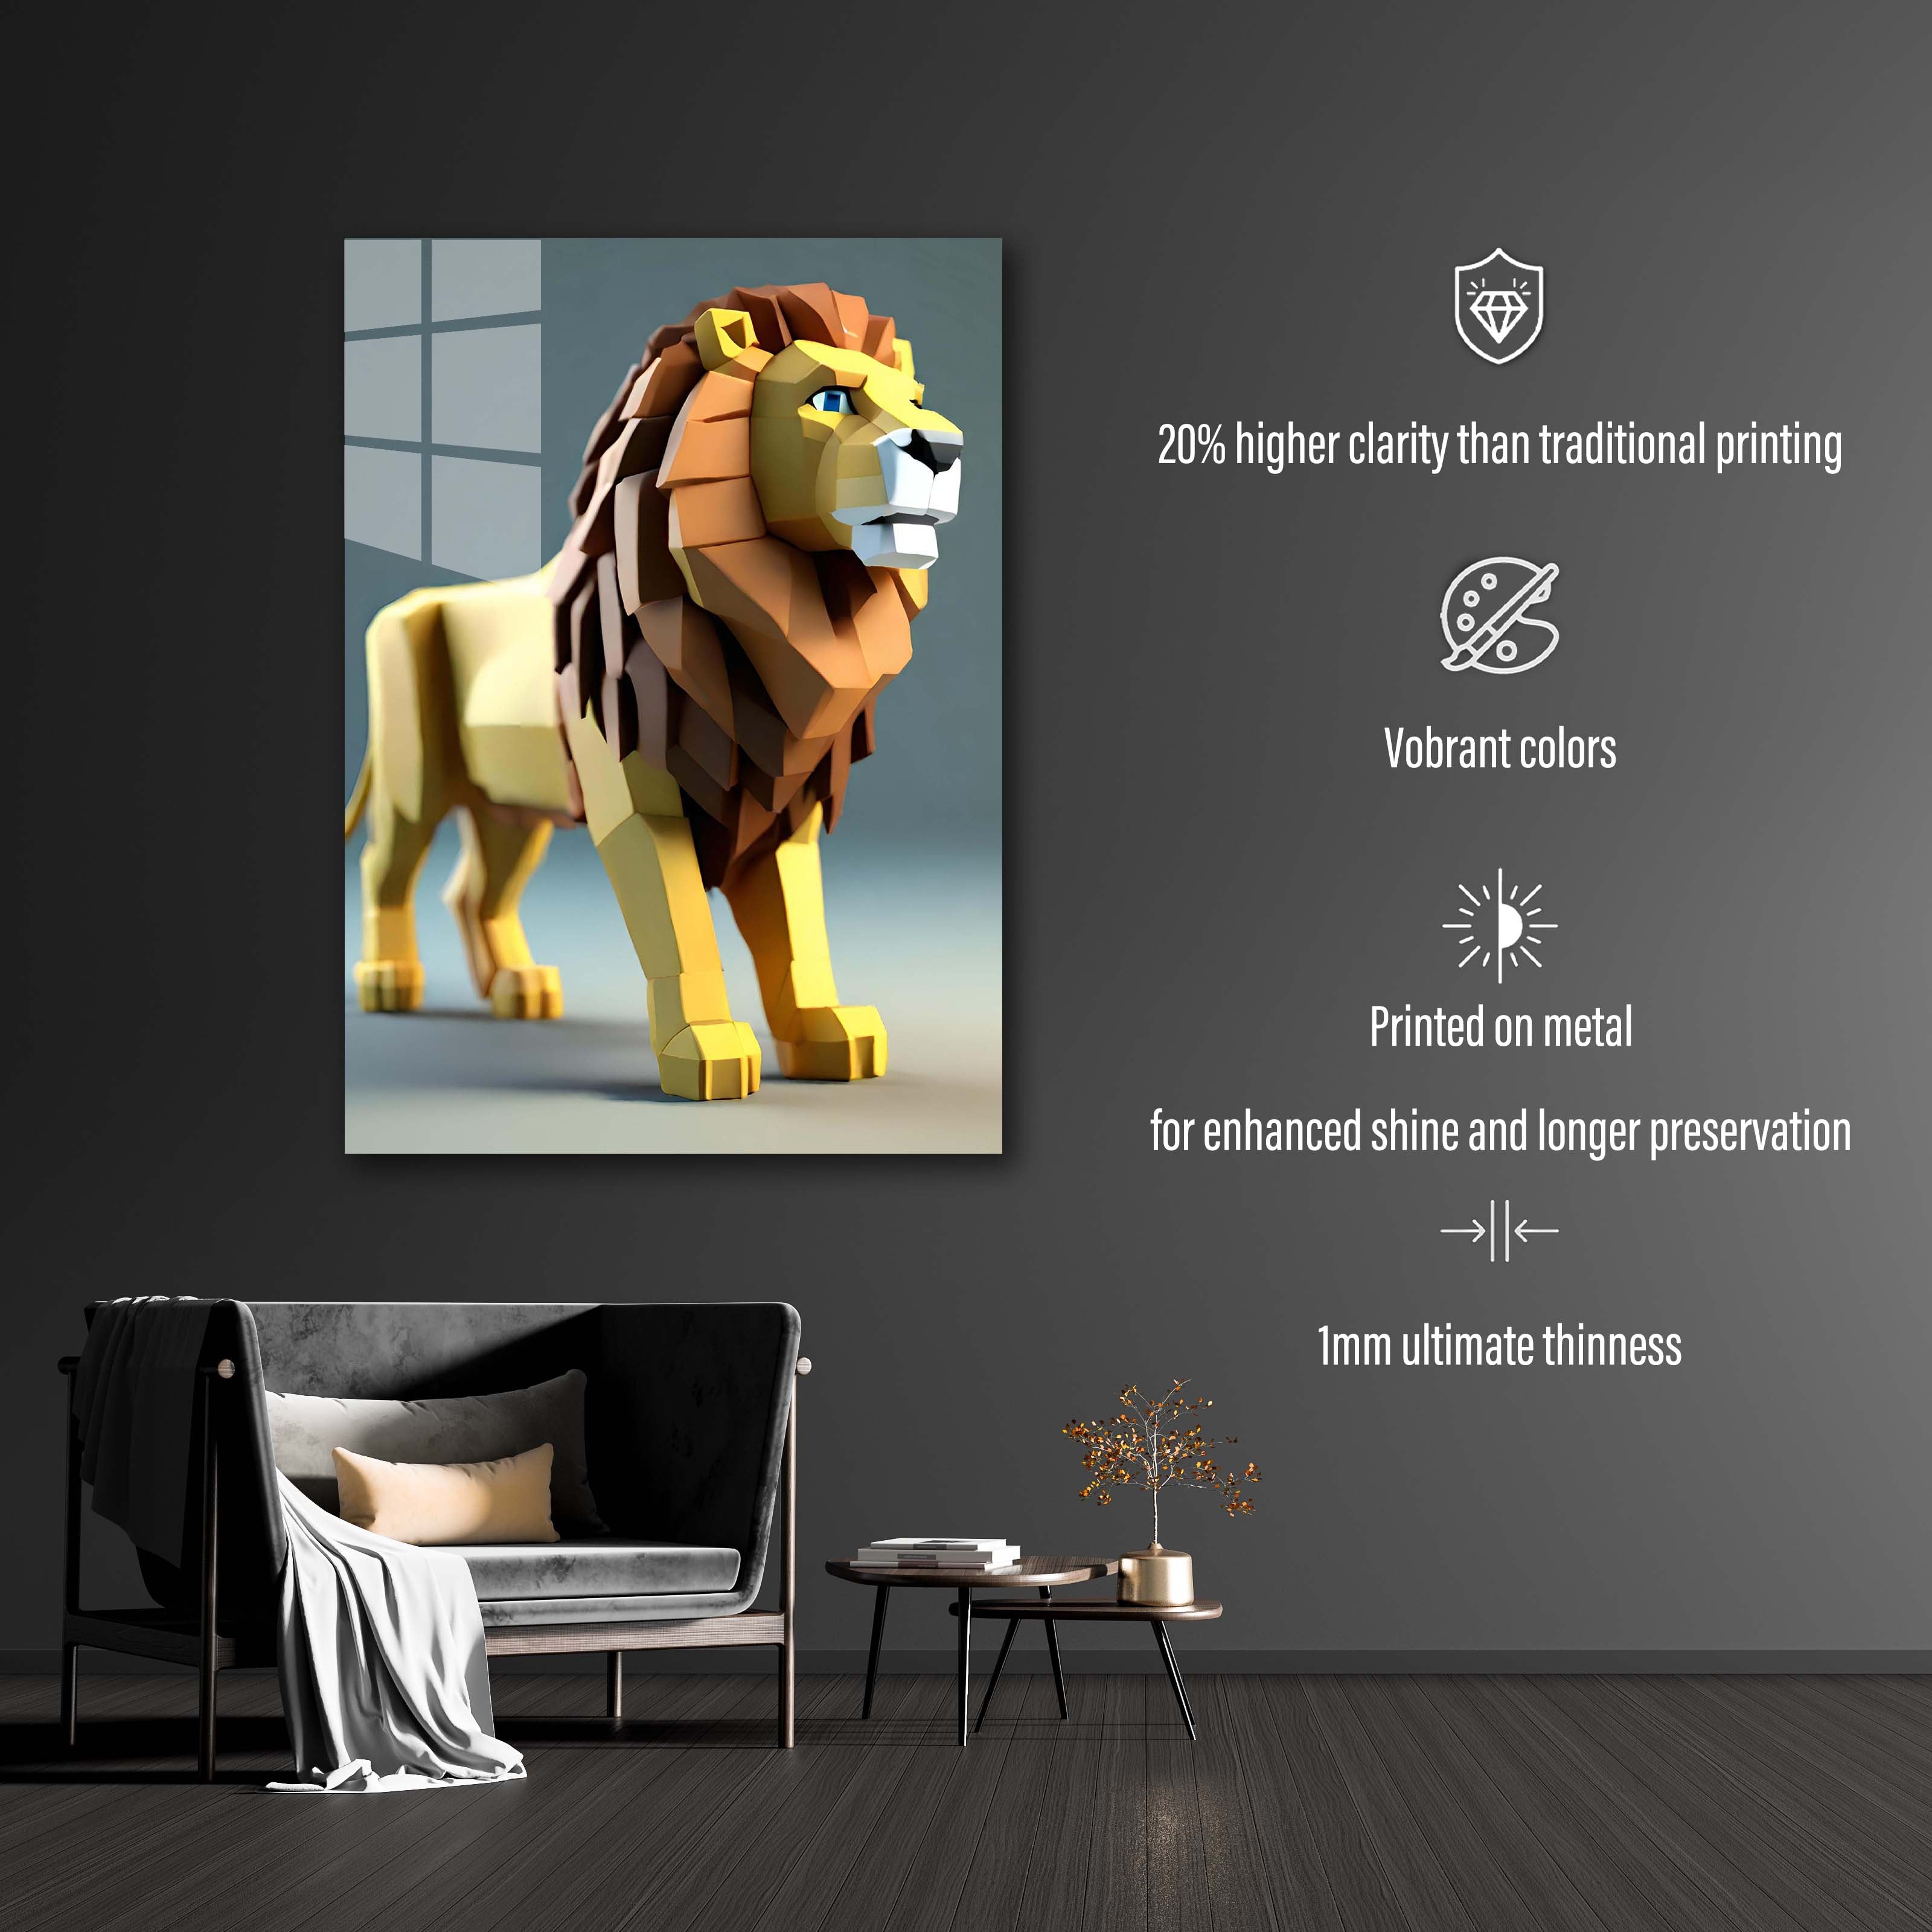 Lion 3D-designed by @DynCreative